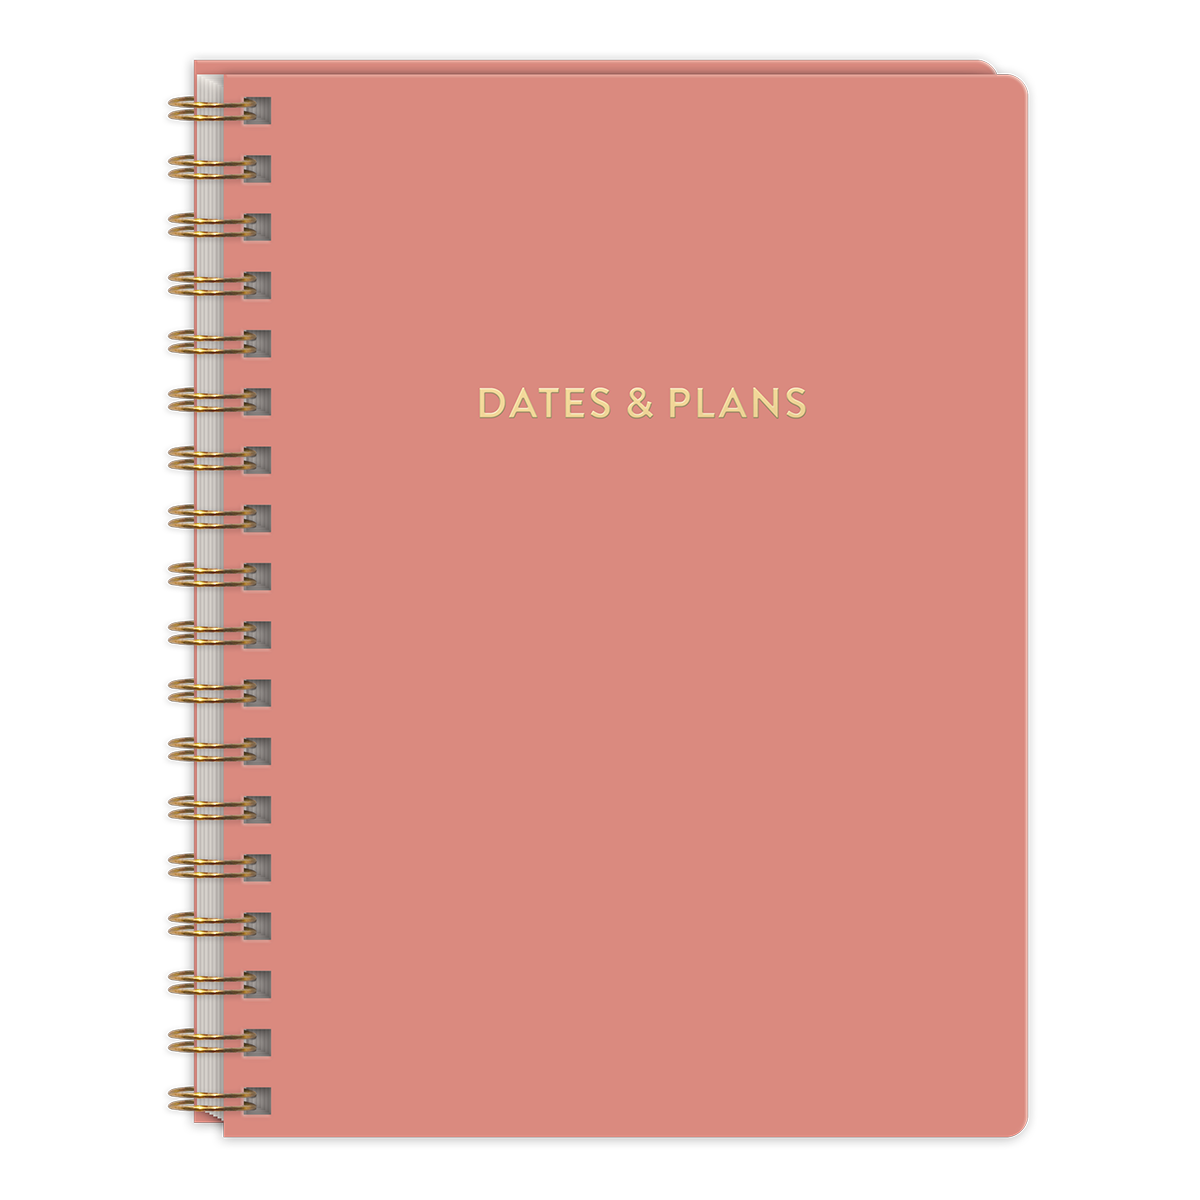 Playful Patterns Clay Undated Planner Product